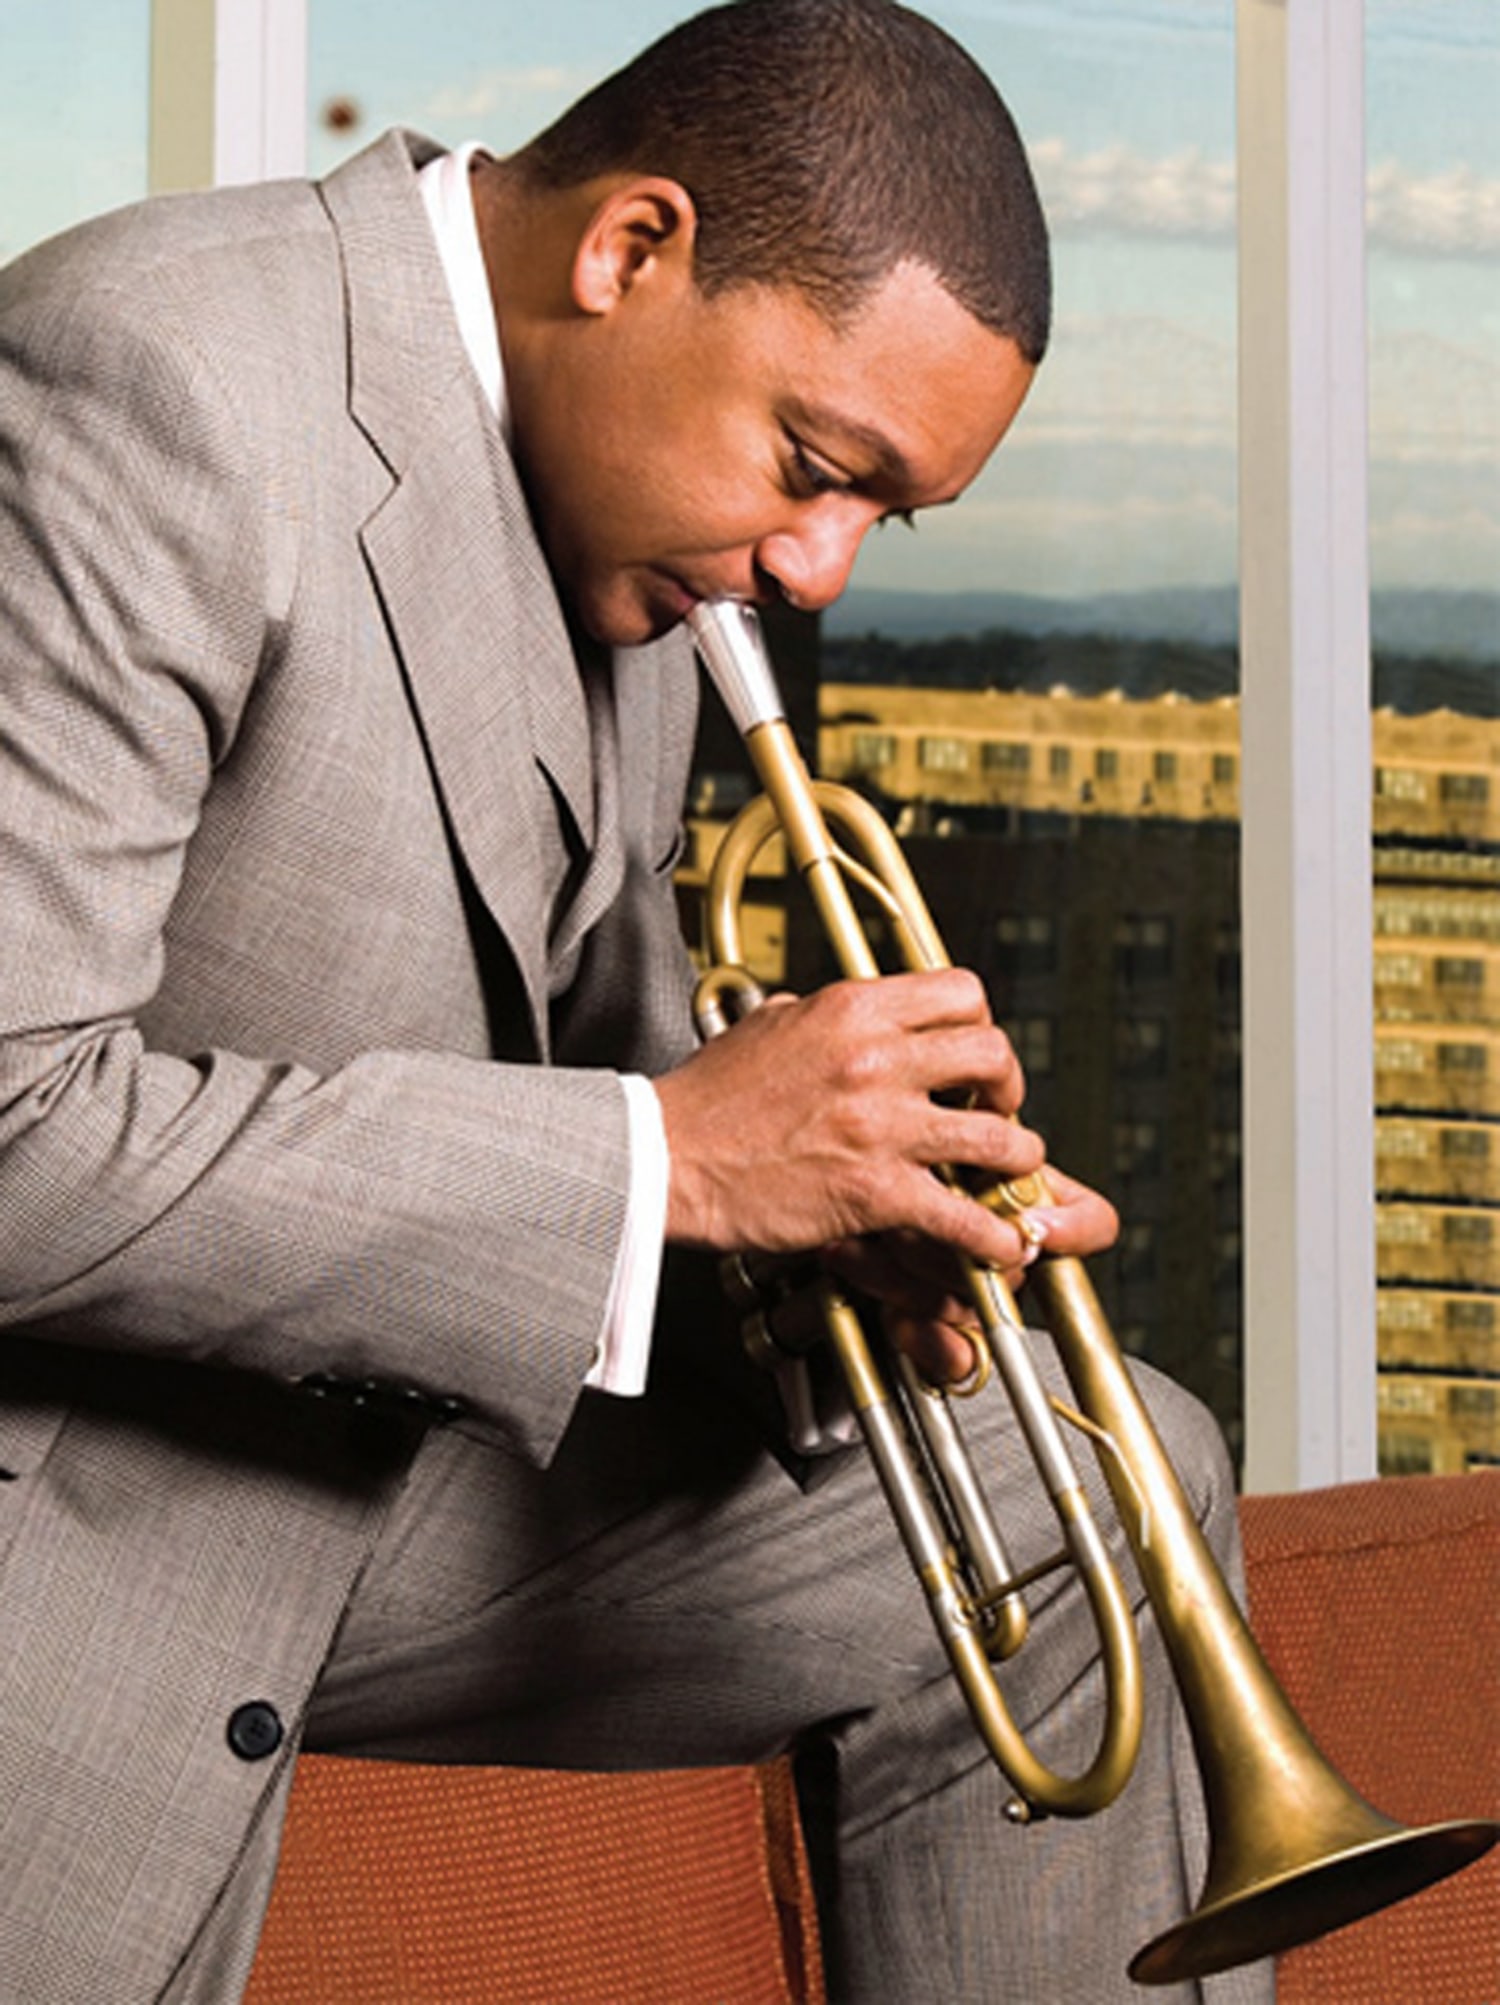 What Makes Wynton Marsalis's Trumpet Playing One of a Kind